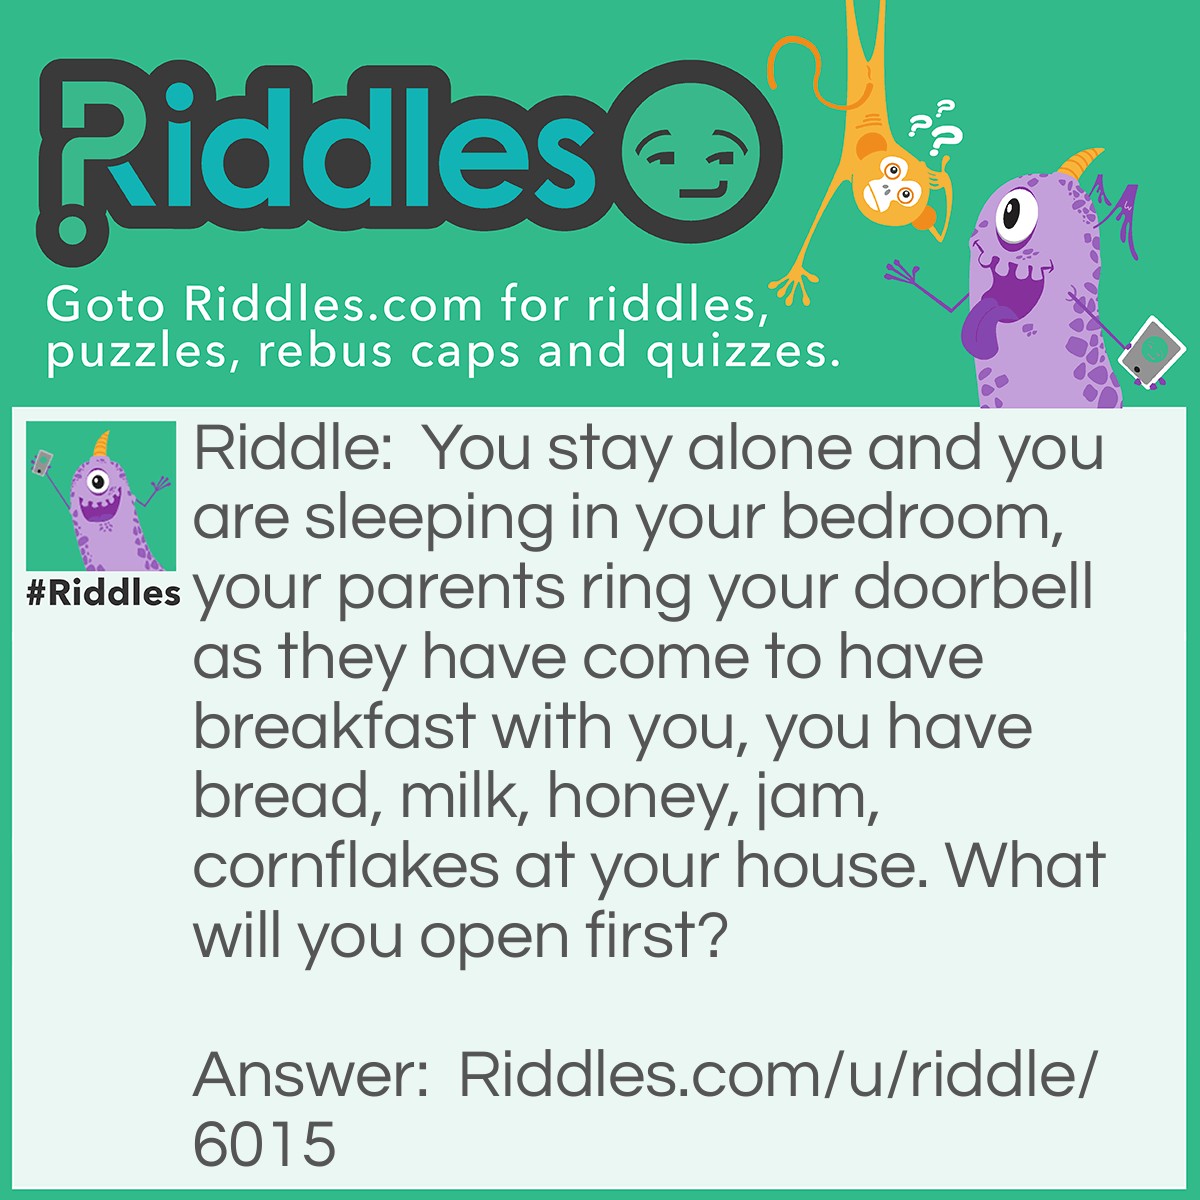 Riddle: You stay alone and you are sleeping in your bedroom, your parents ring your doorbell as they have come to have breakfast with you, you have bread, milk, honey, jam, cornflakes at your house. What will you open first? Answer: Your eyes.